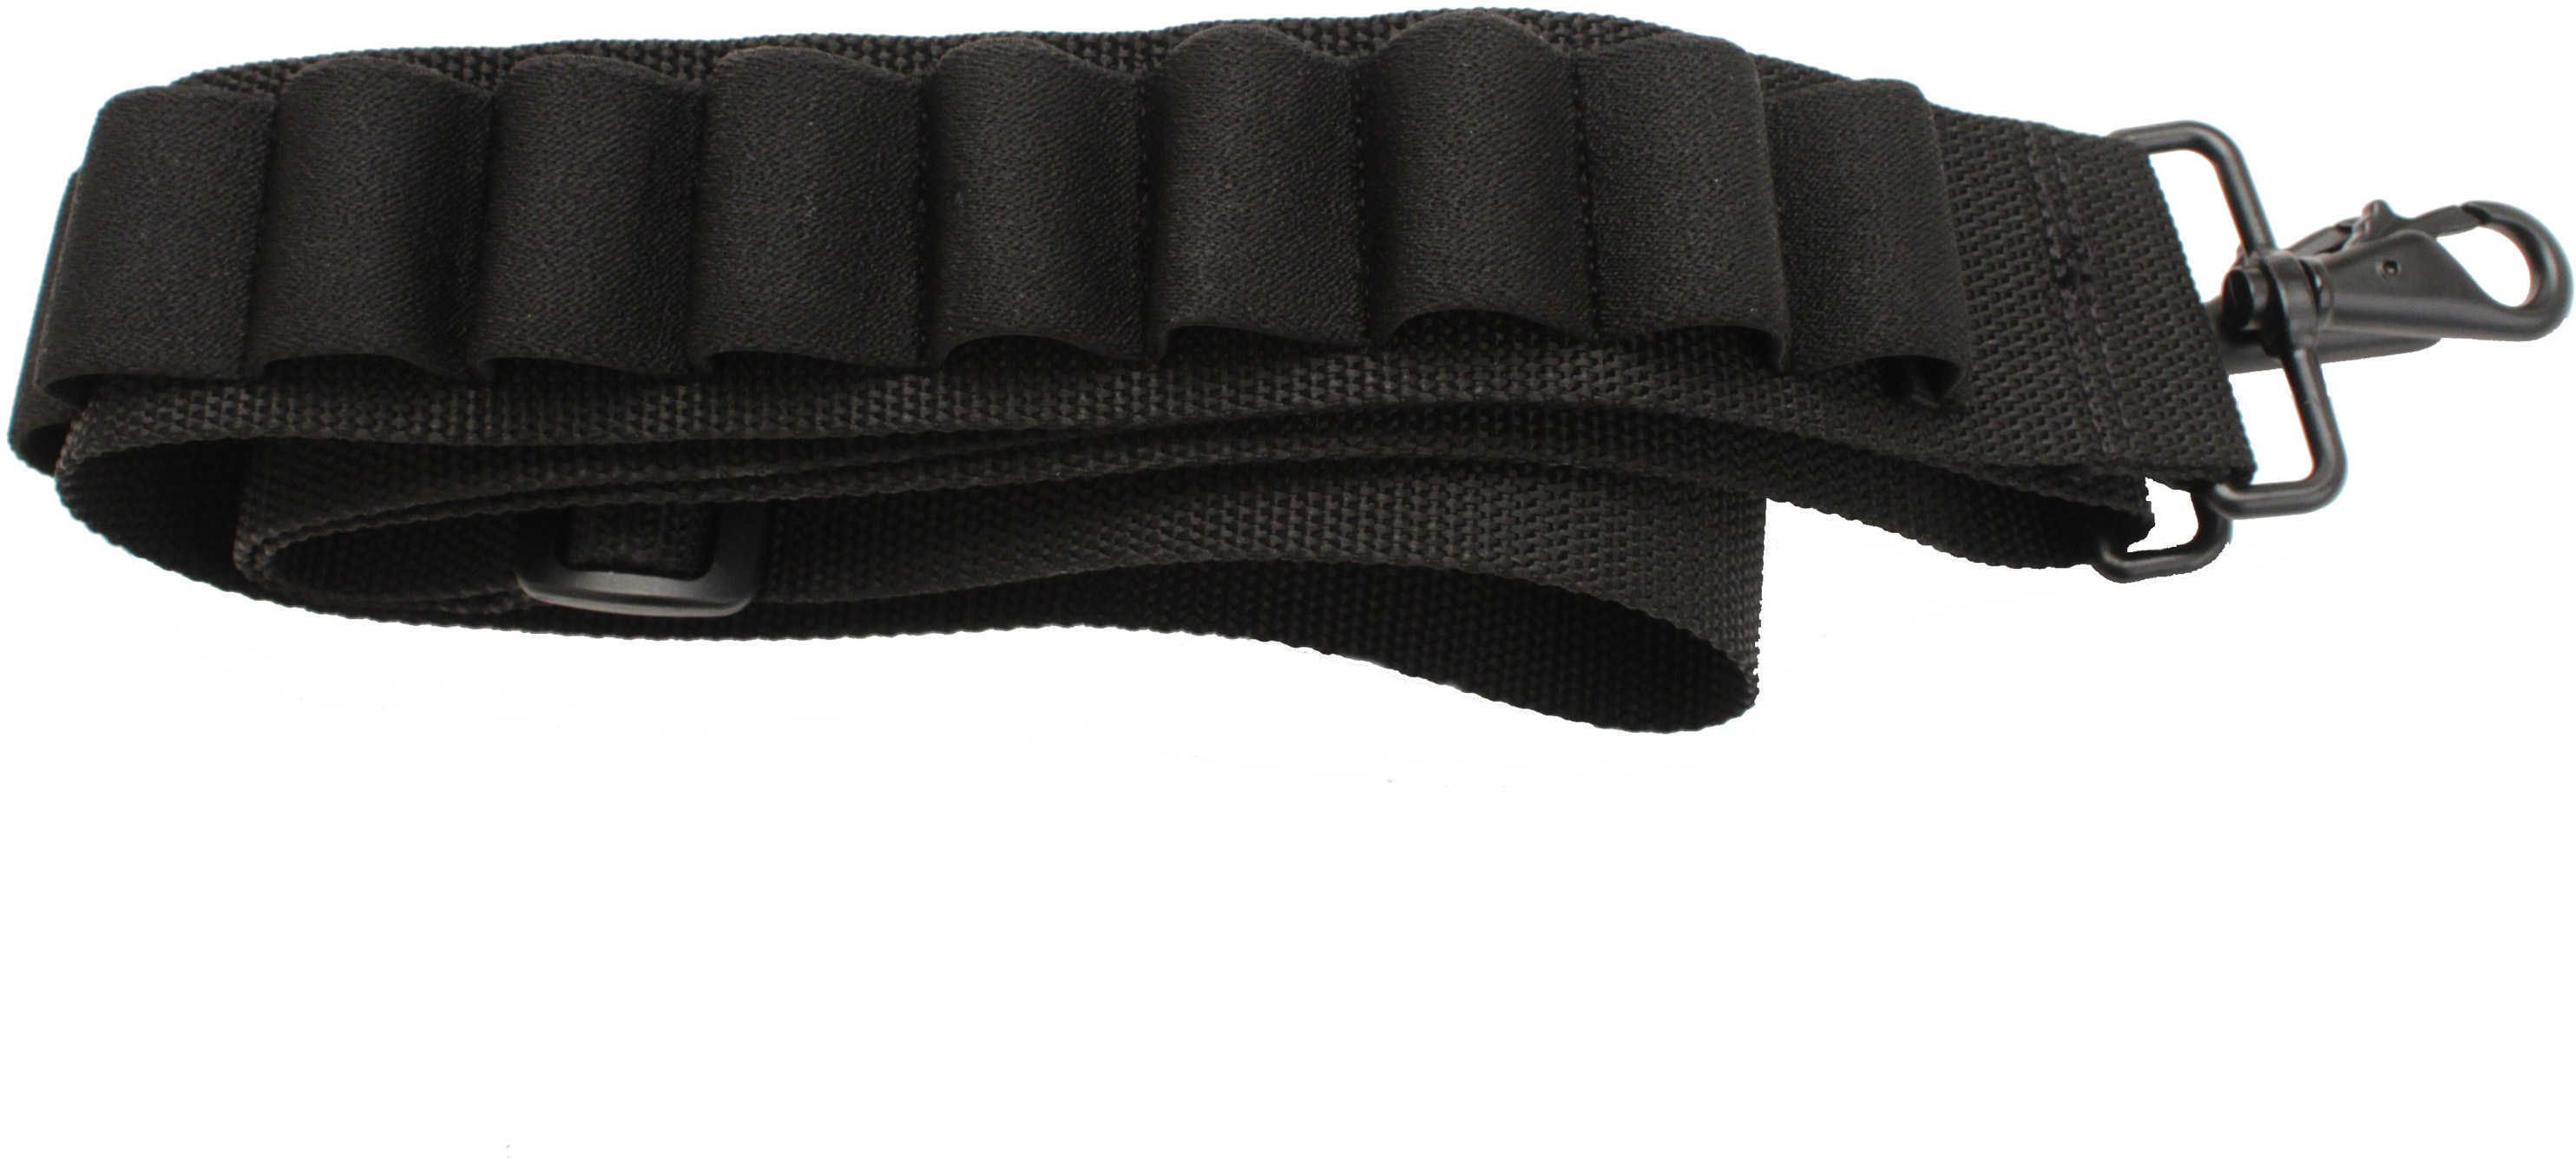 Shotgun Sling Black - Fully Adjustable And Holds 15 Extra shells Attaches To Standard Swivels With Durable Steel